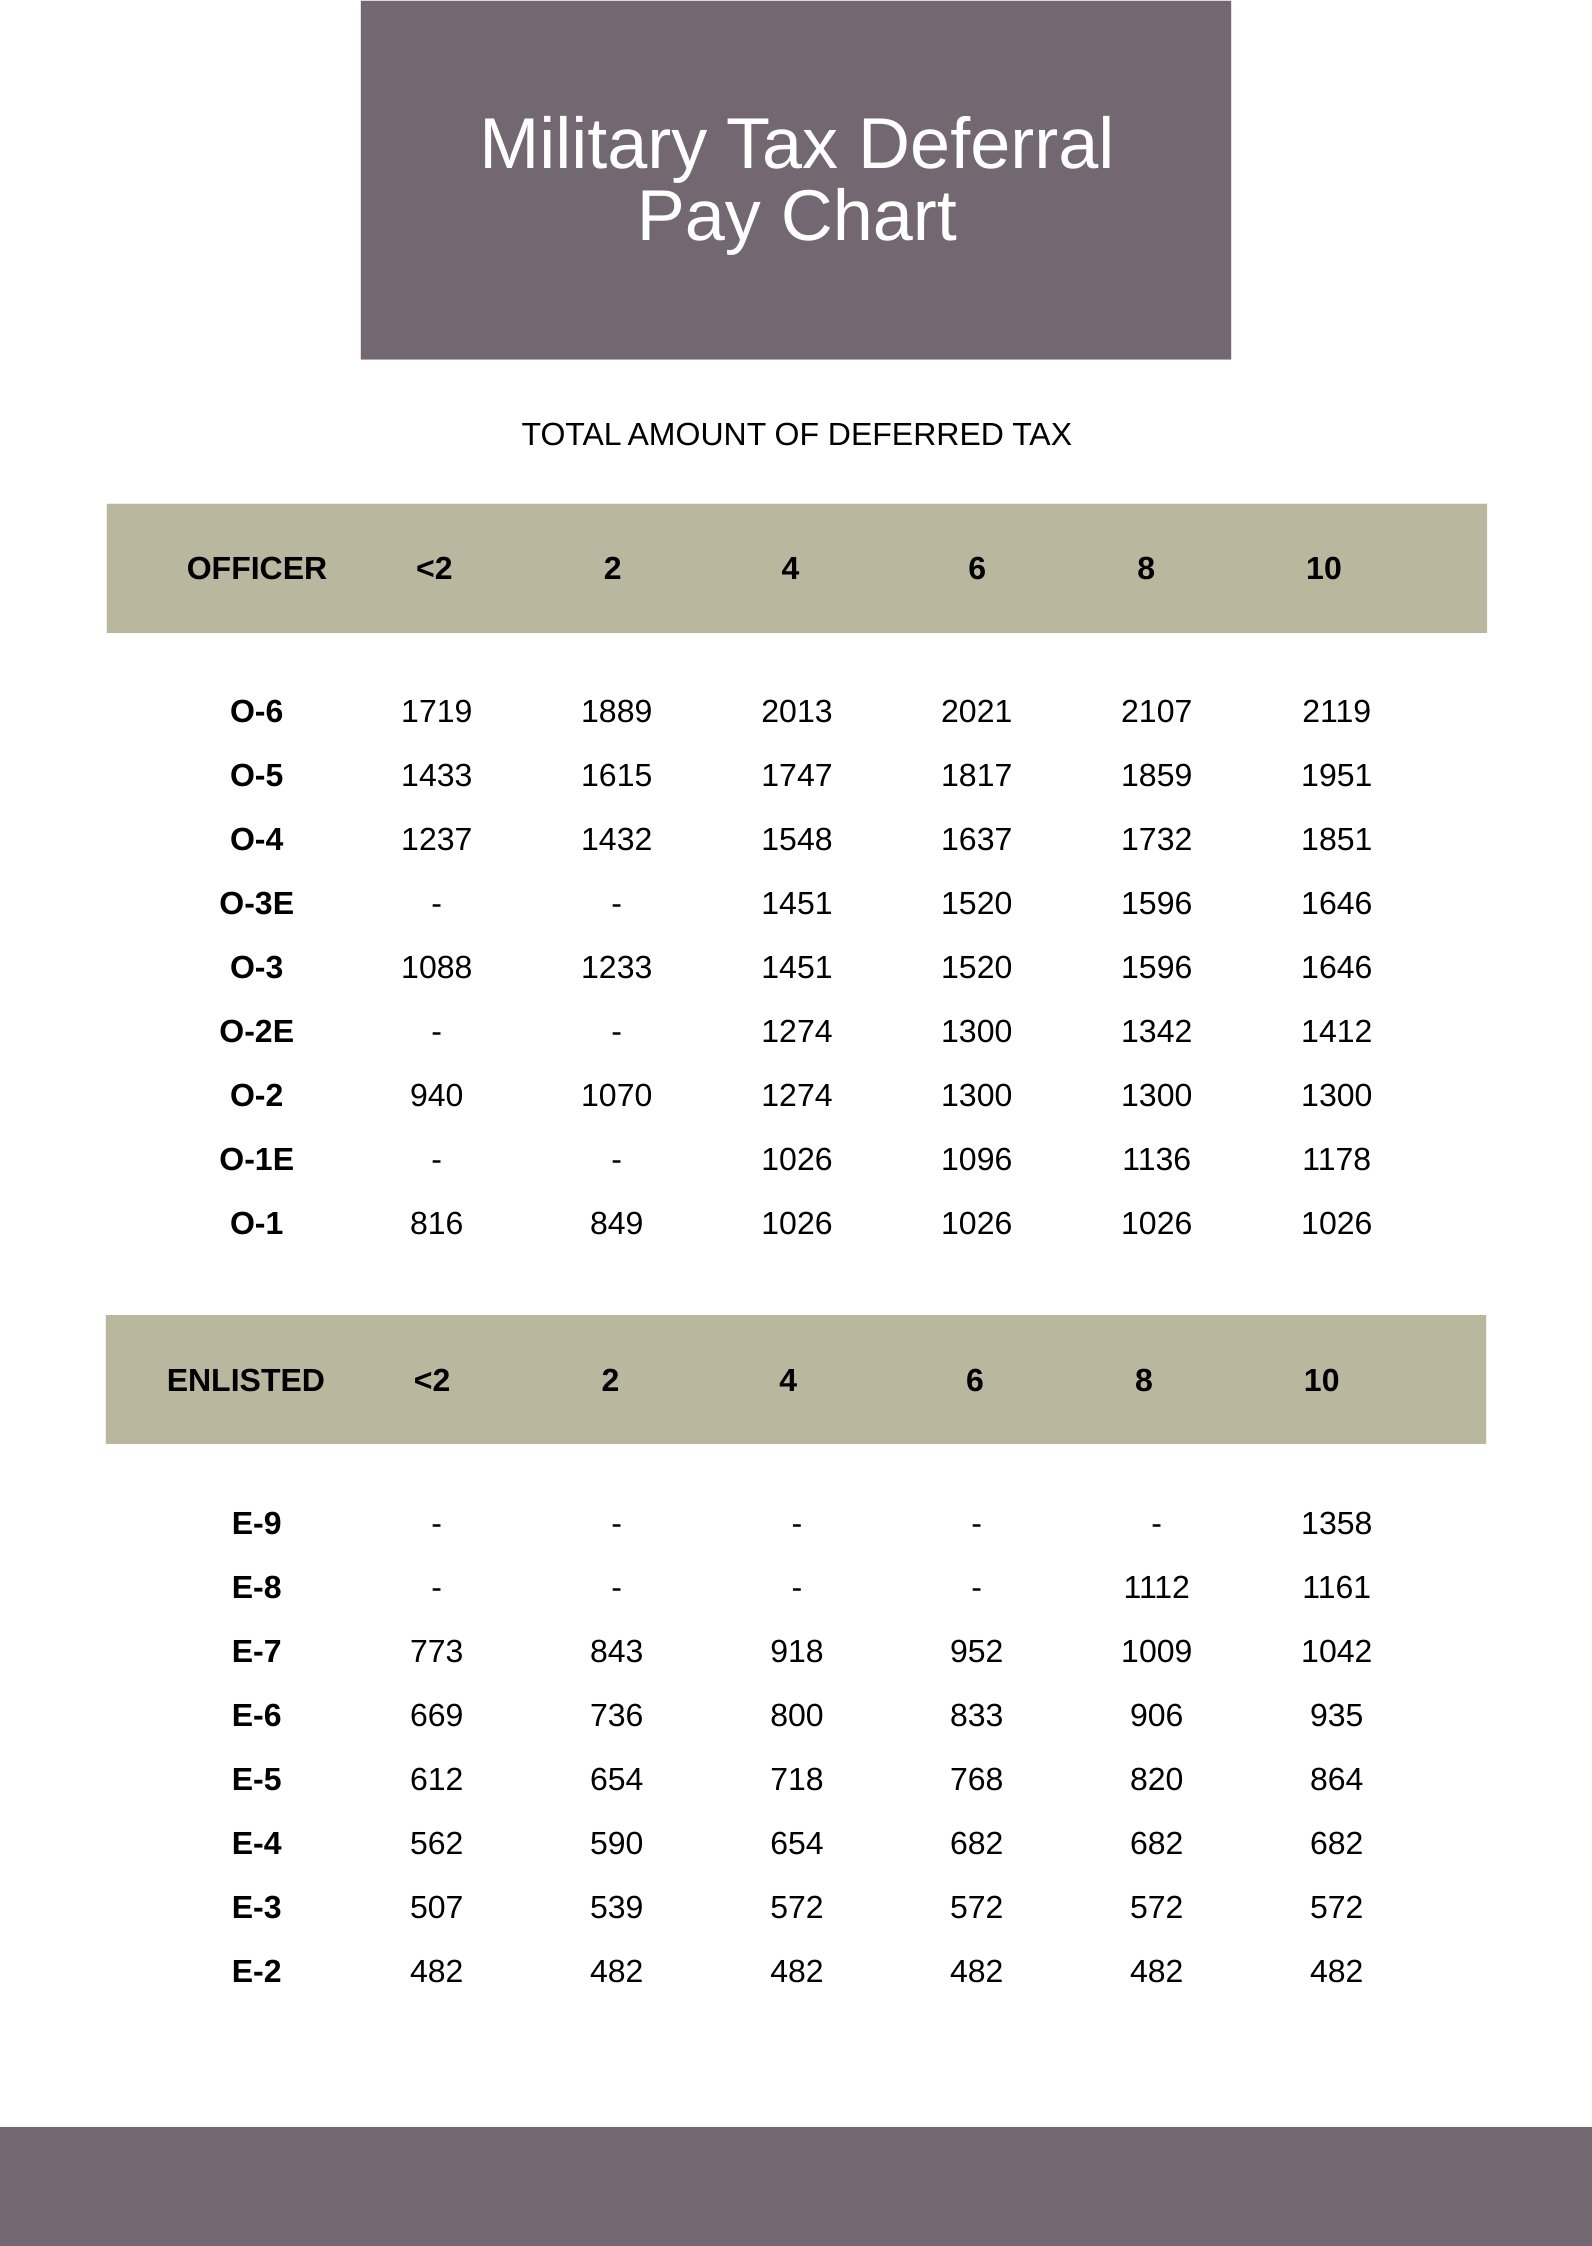 Military Tax Deferral Pay Chart in PDF